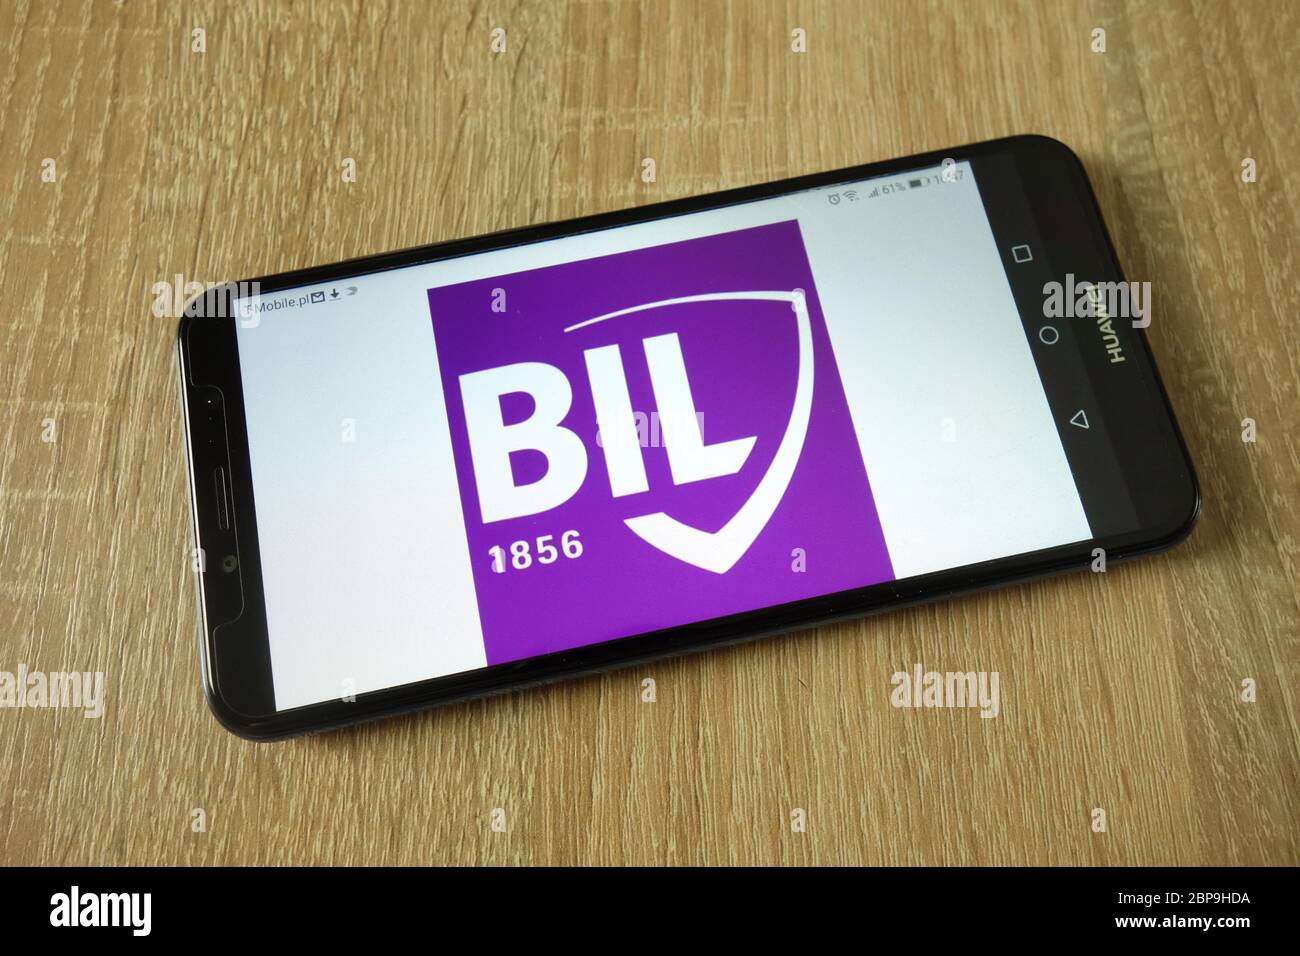 Banque Internationale a Luxembourg (BIL) logo displayed on smartphone Stock  Photo - Alamy